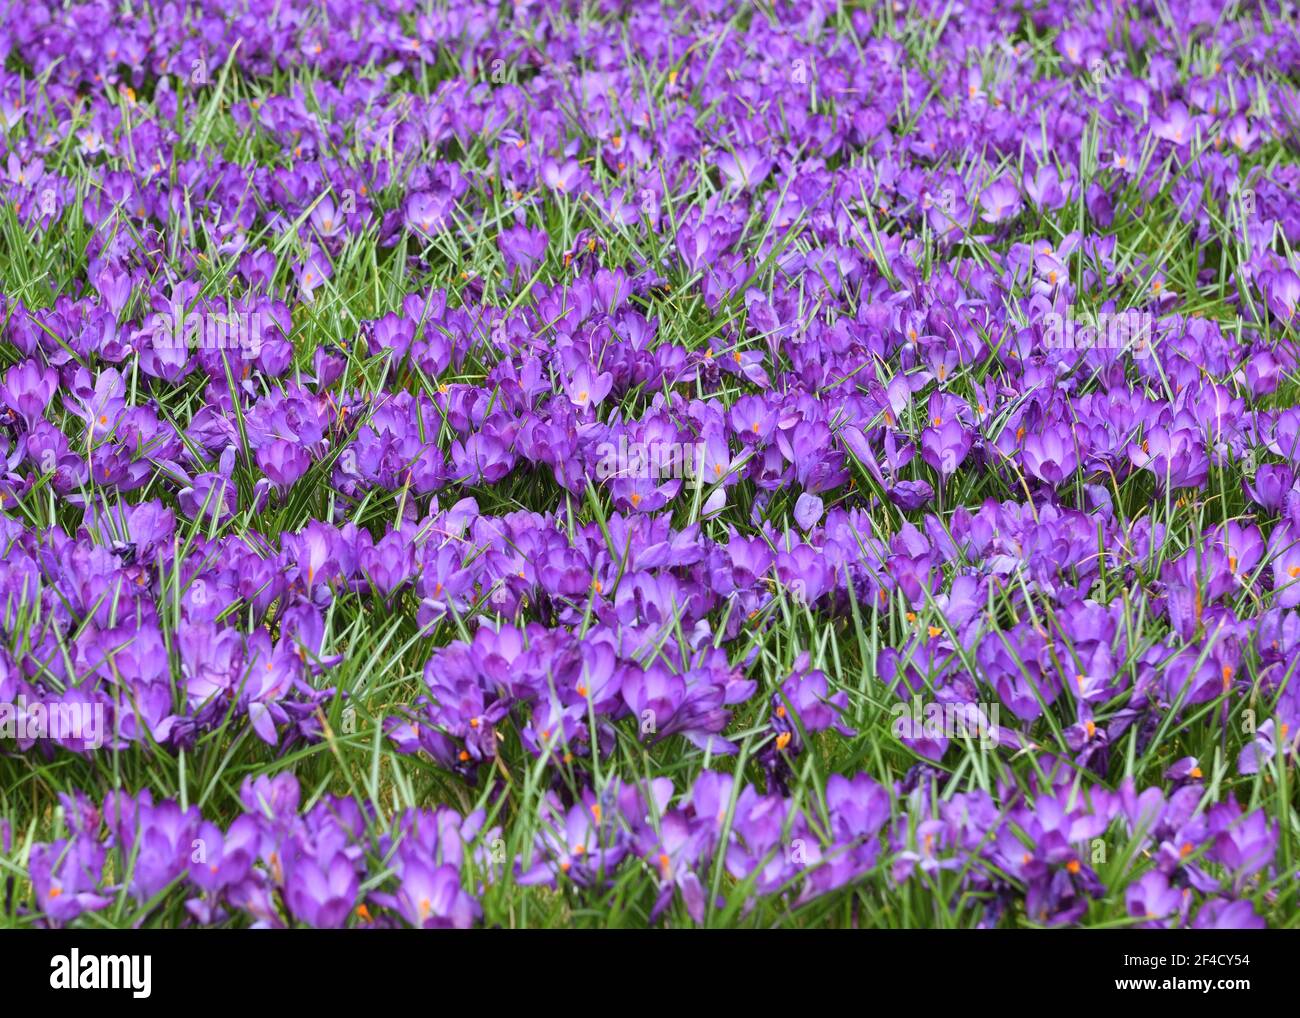 Glasgow, Scotland, UK. 20th, March, 2021. A mild day in Glasgow with Spring temperatures around 10 degrees centigrade typified by the masses of crocuses in bloom in Glasgow University grounds. Credit Douglas Carr/Alamy Live News Stock Photo